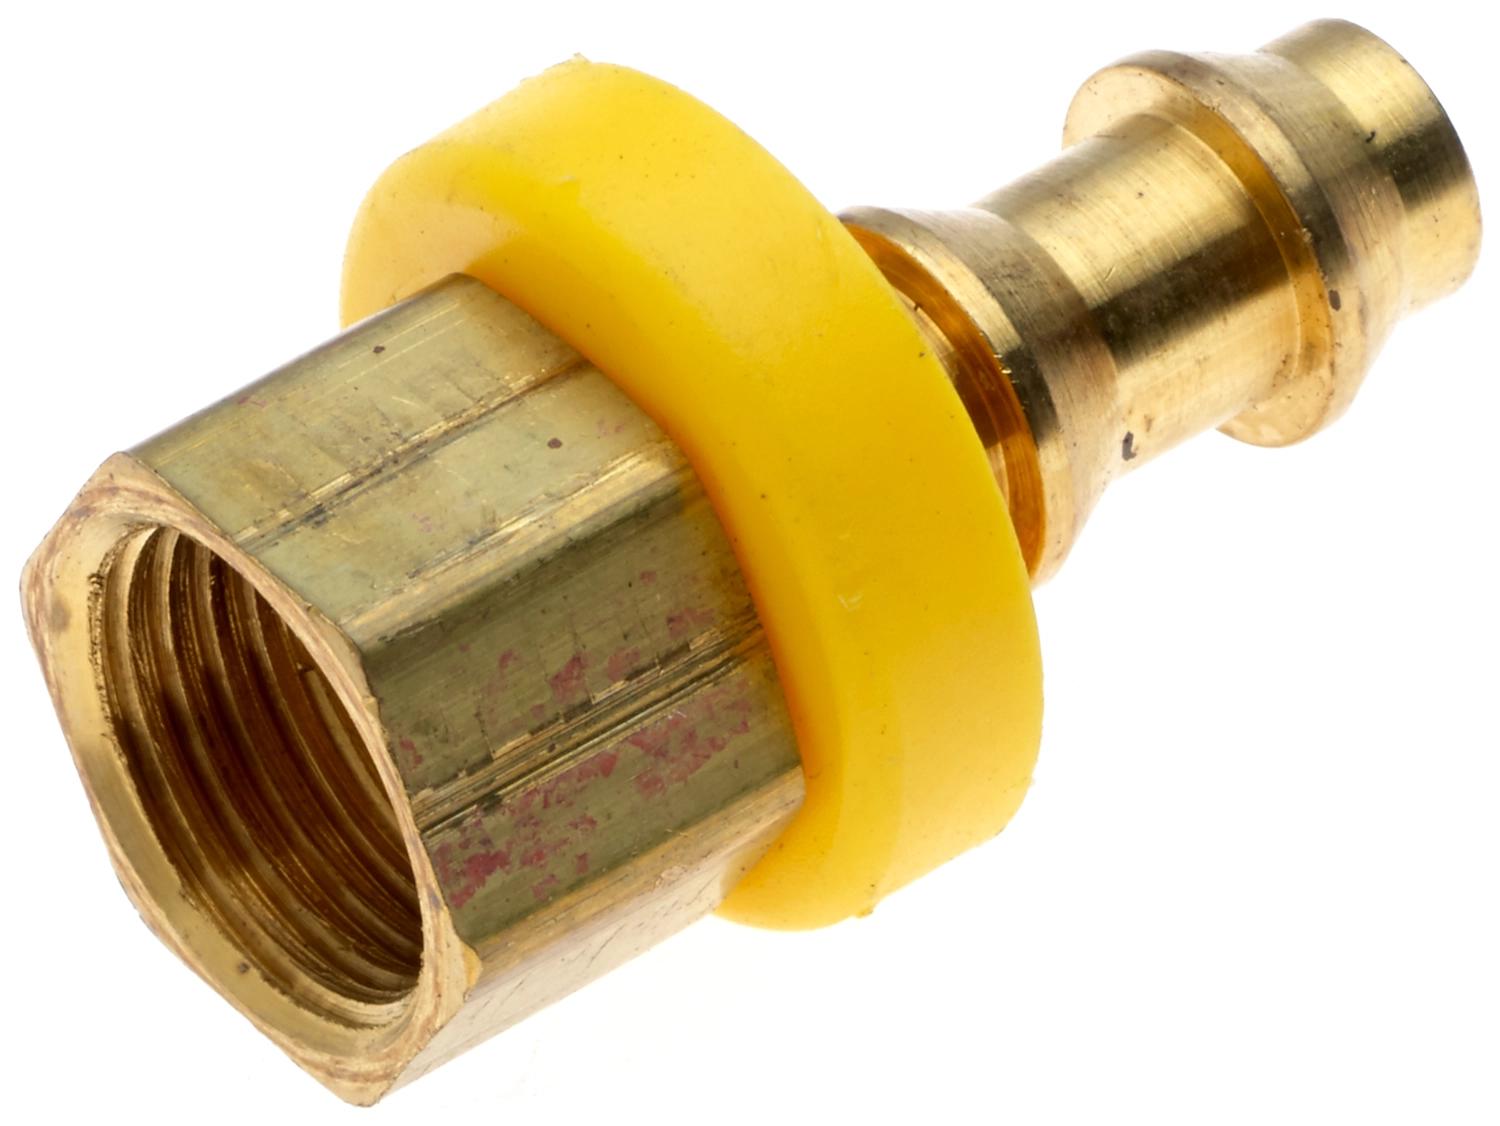 Gates G36508-0403/4LOC-3RFI Textile Braid Hose and Couplings Brass Lock-On Field Attachable Couplings for LOC and LOL Hose, G36508-0403 4LOC-3RFI 10004BA03 3/8-24 0.25 6.4 0.75 19.1 0.75 1 0.02